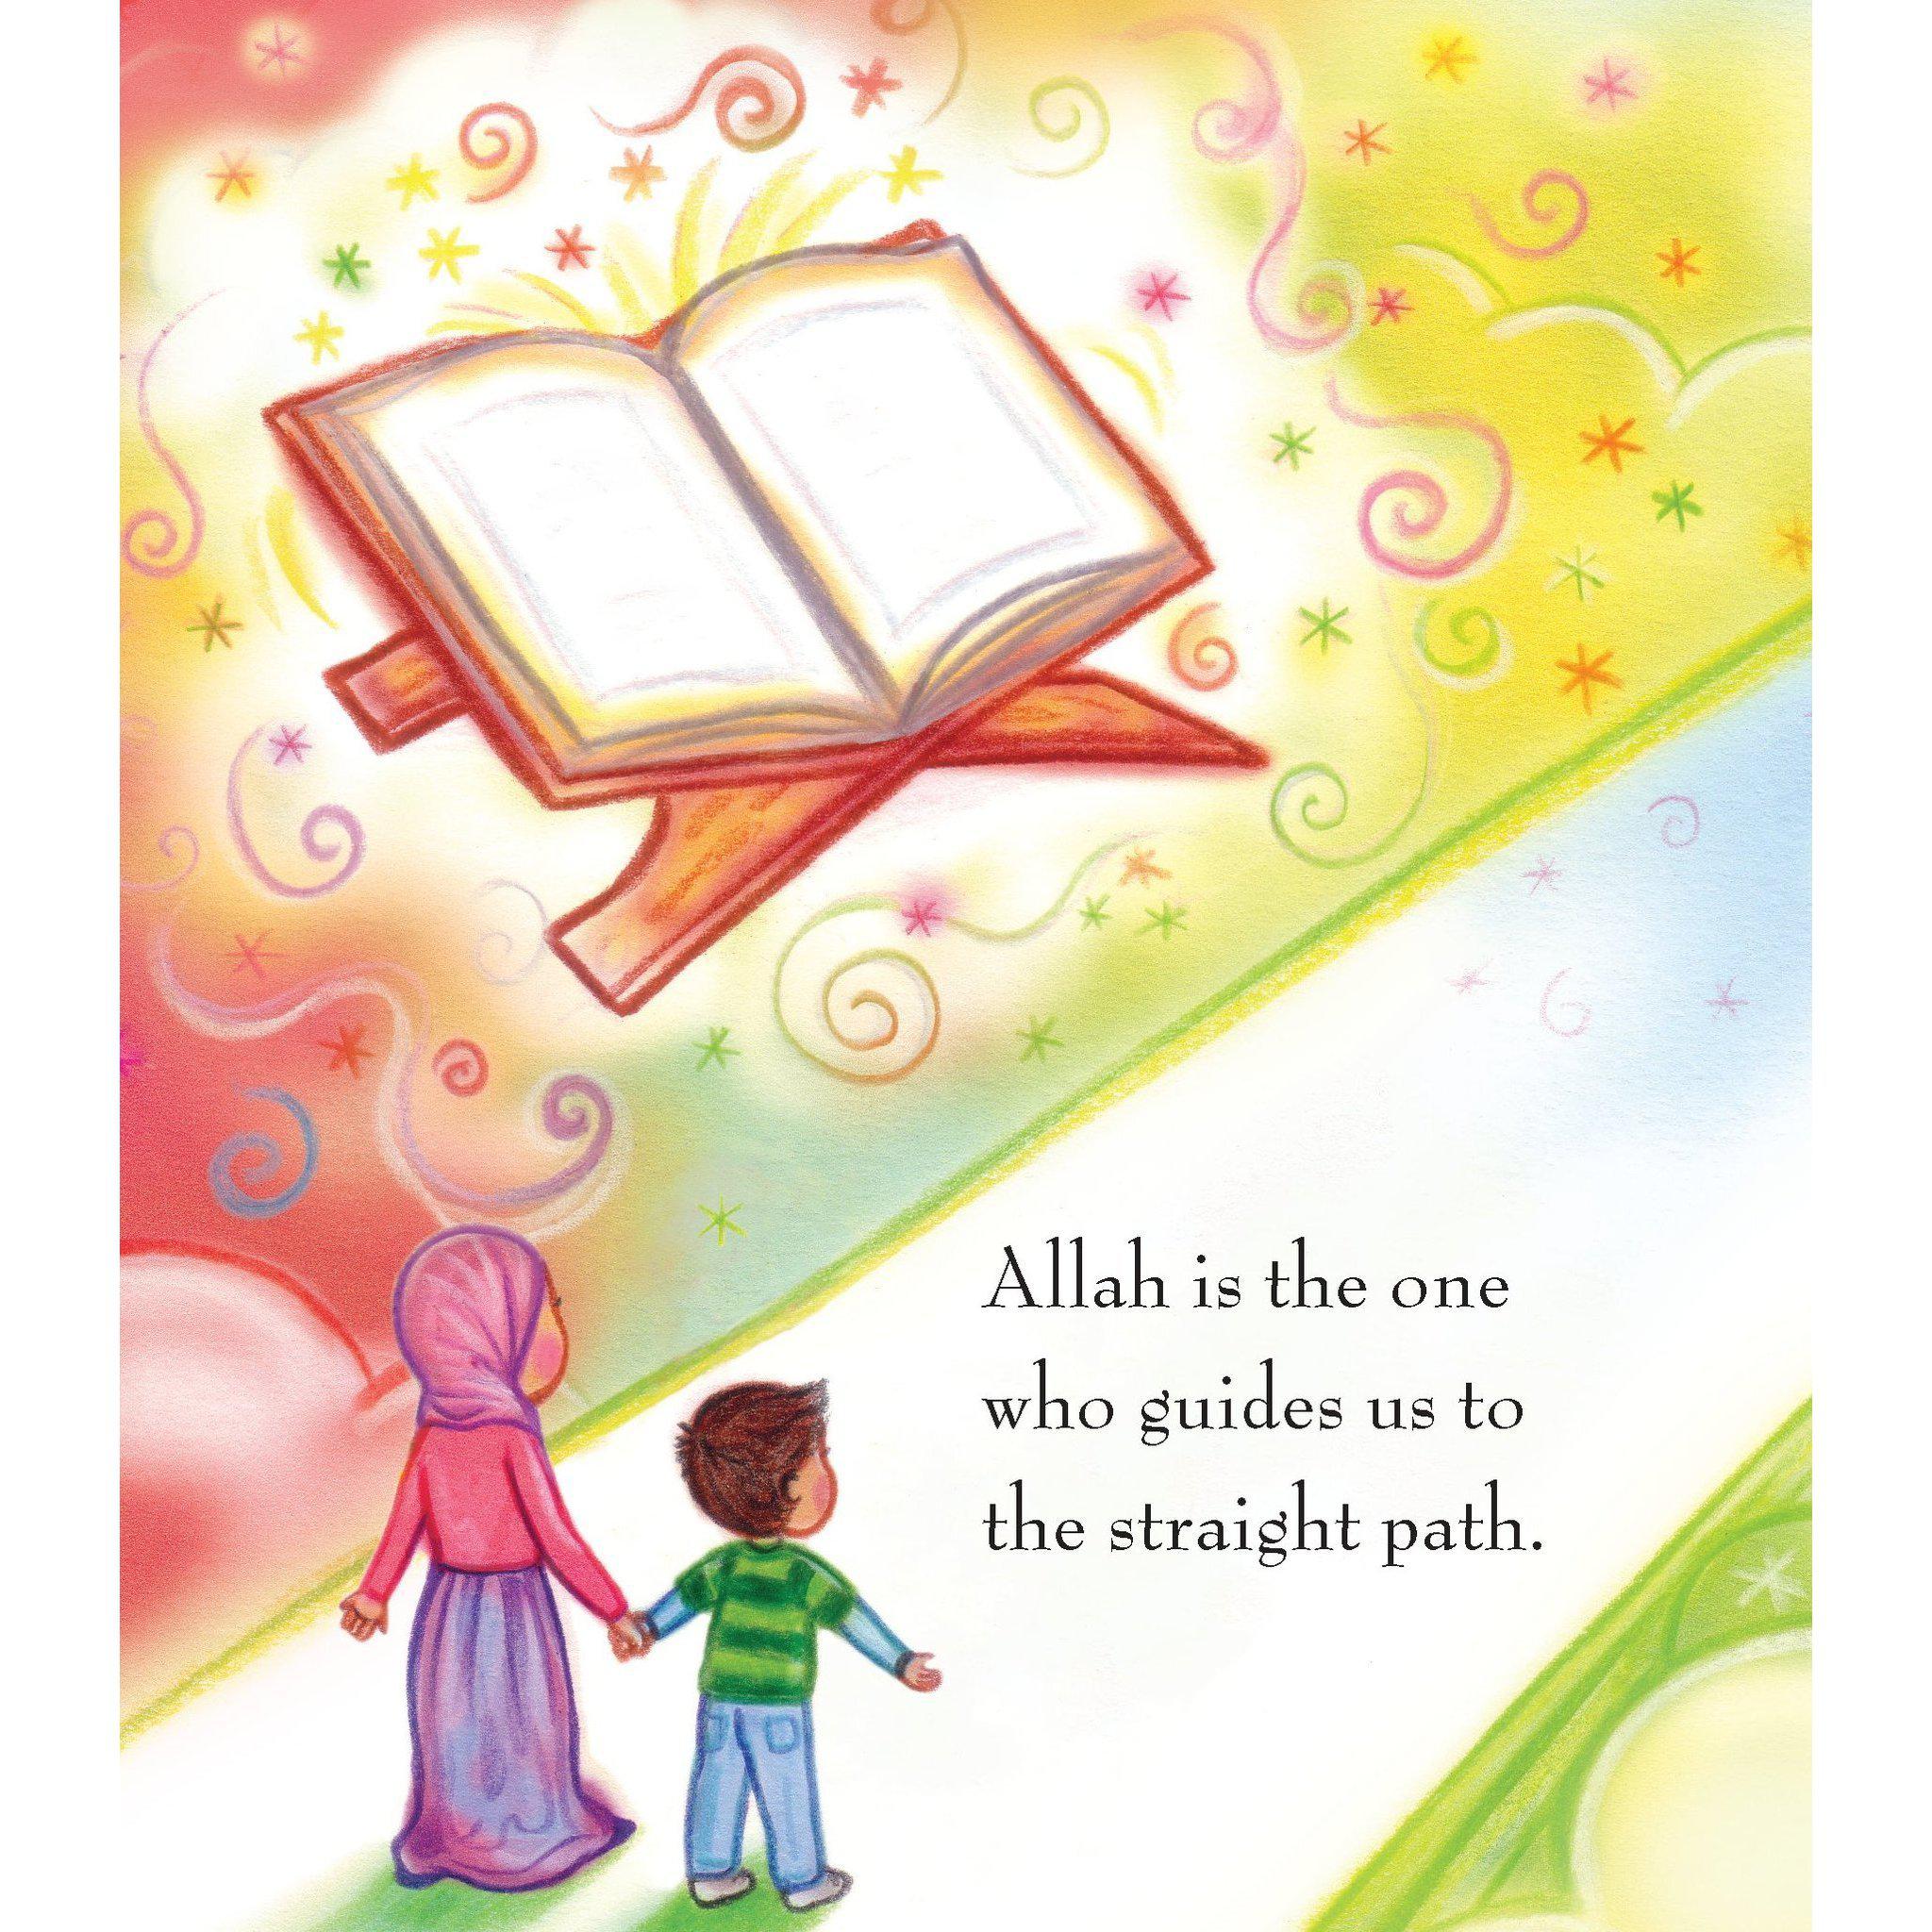 My First Book About Allah - Quran Co™